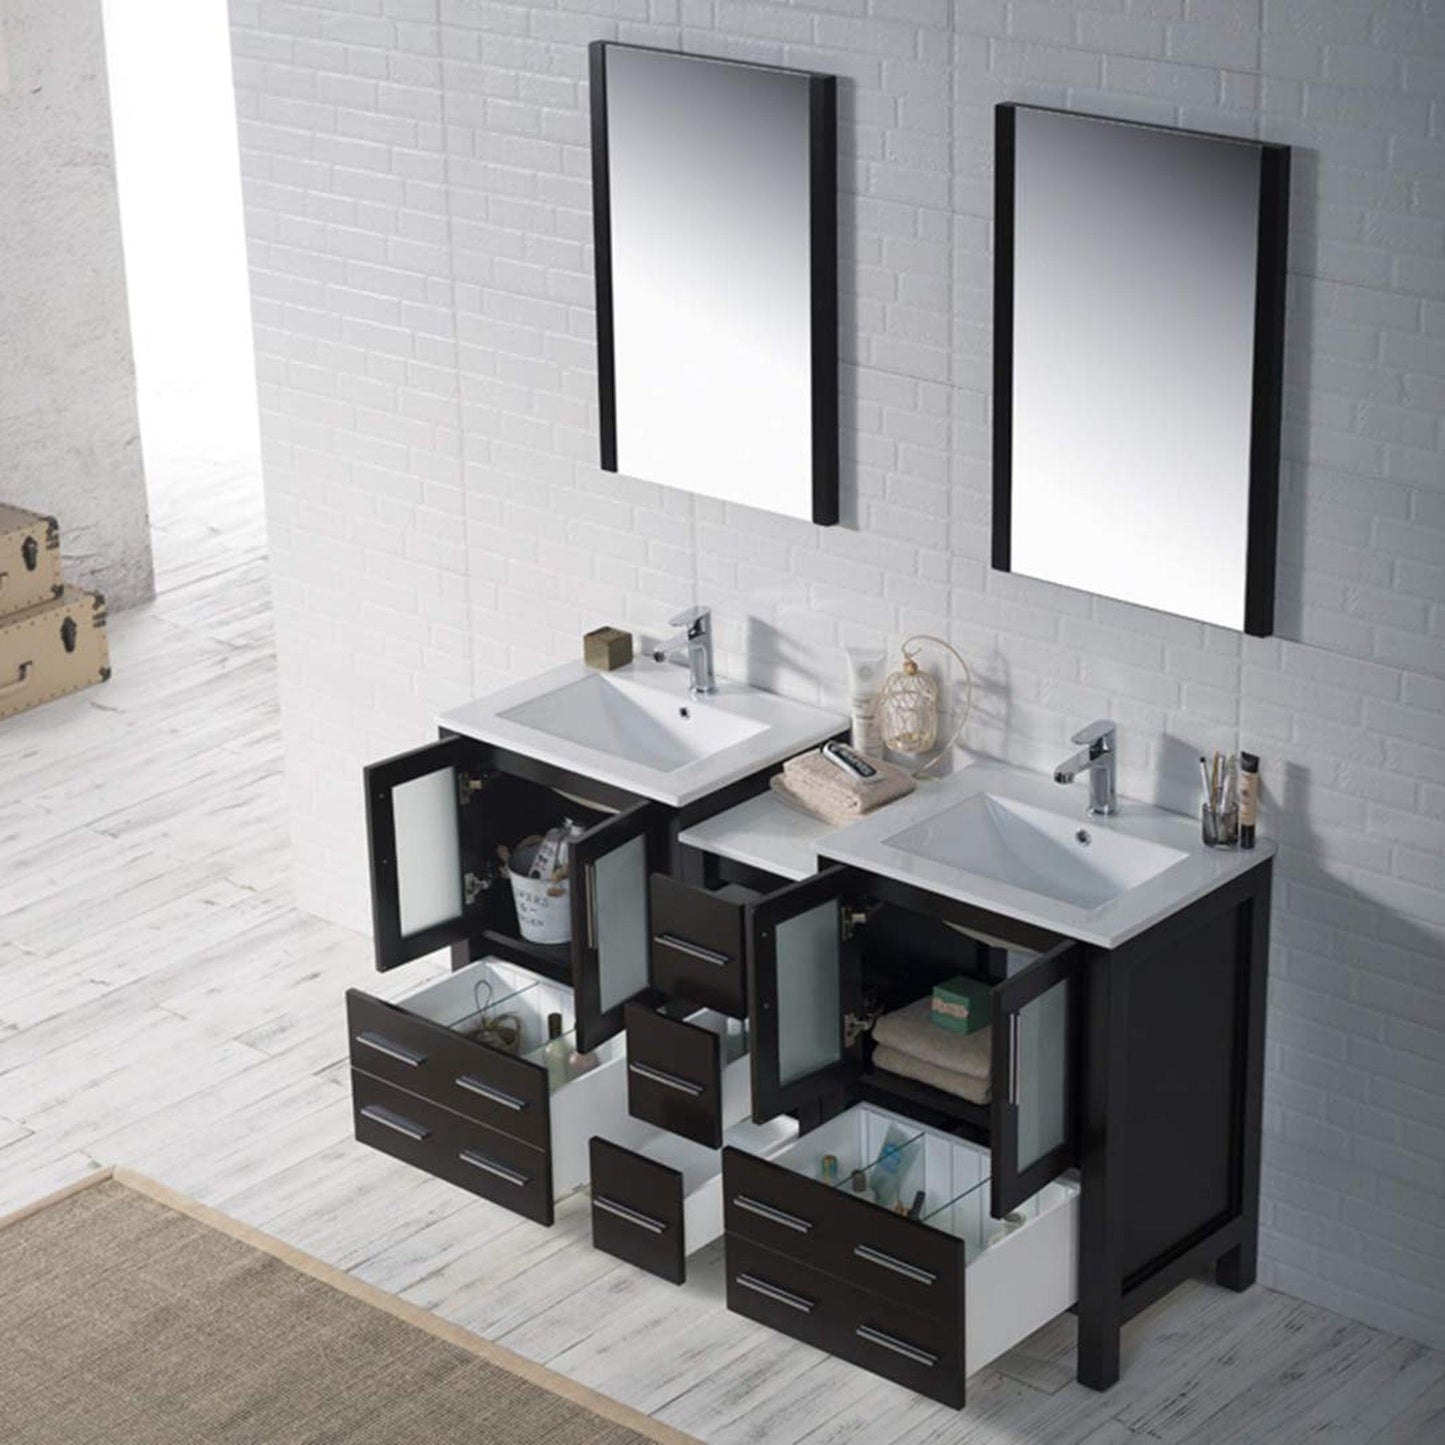 Blossom Sydney 60" Espresso Freestanding Vanity Set With Integrated Double Sink Ceramic Top, Mirror and Side Cabinet